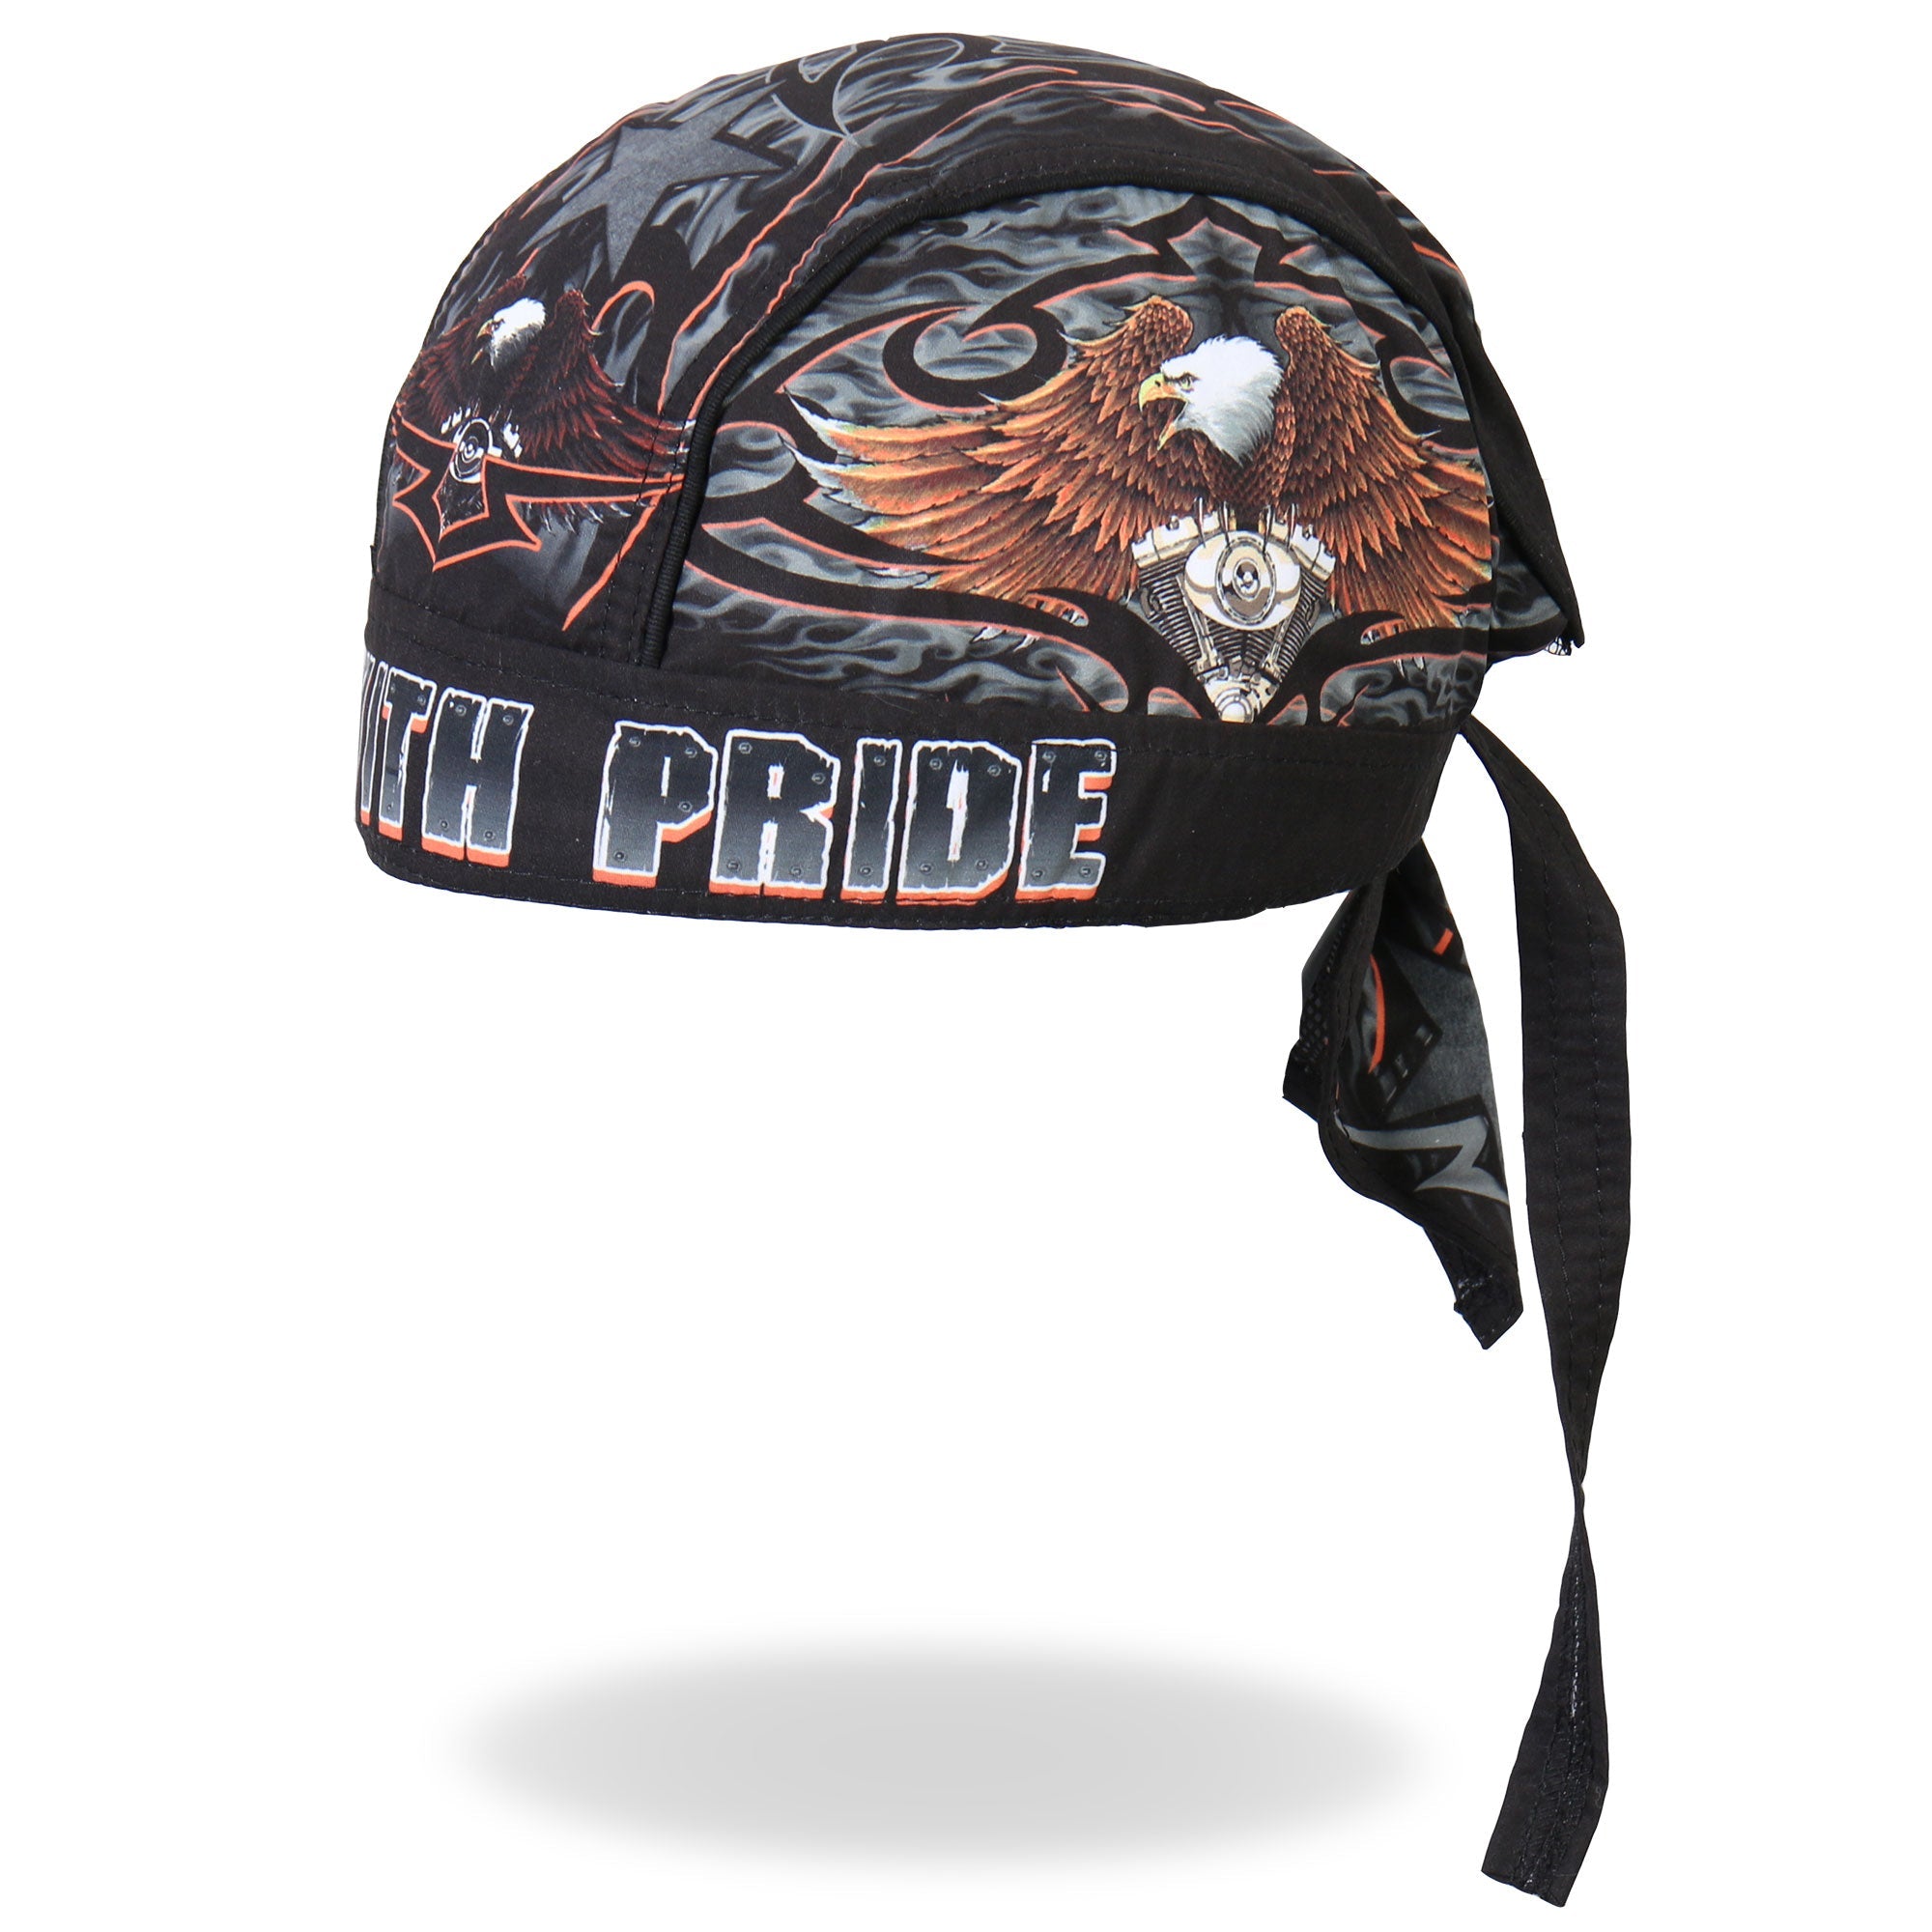 Hot Leathers Ride with Pride Lightweight Headwrap HWH1016